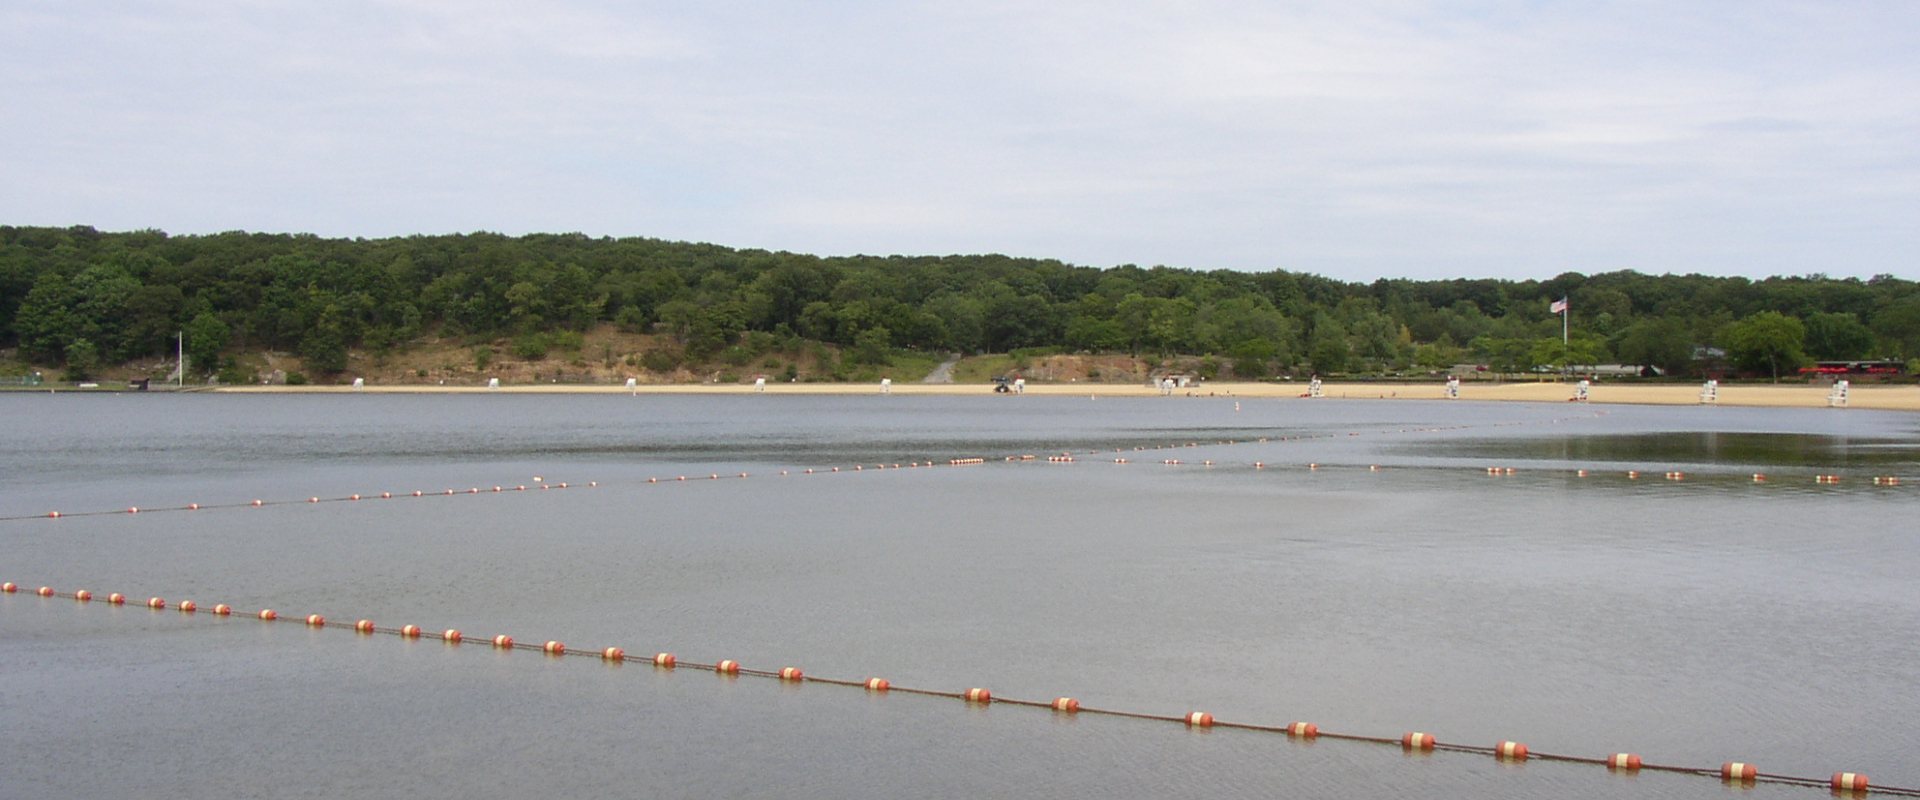 Algae prevention strategy in Lake Welch, New York Dutch Water Sector